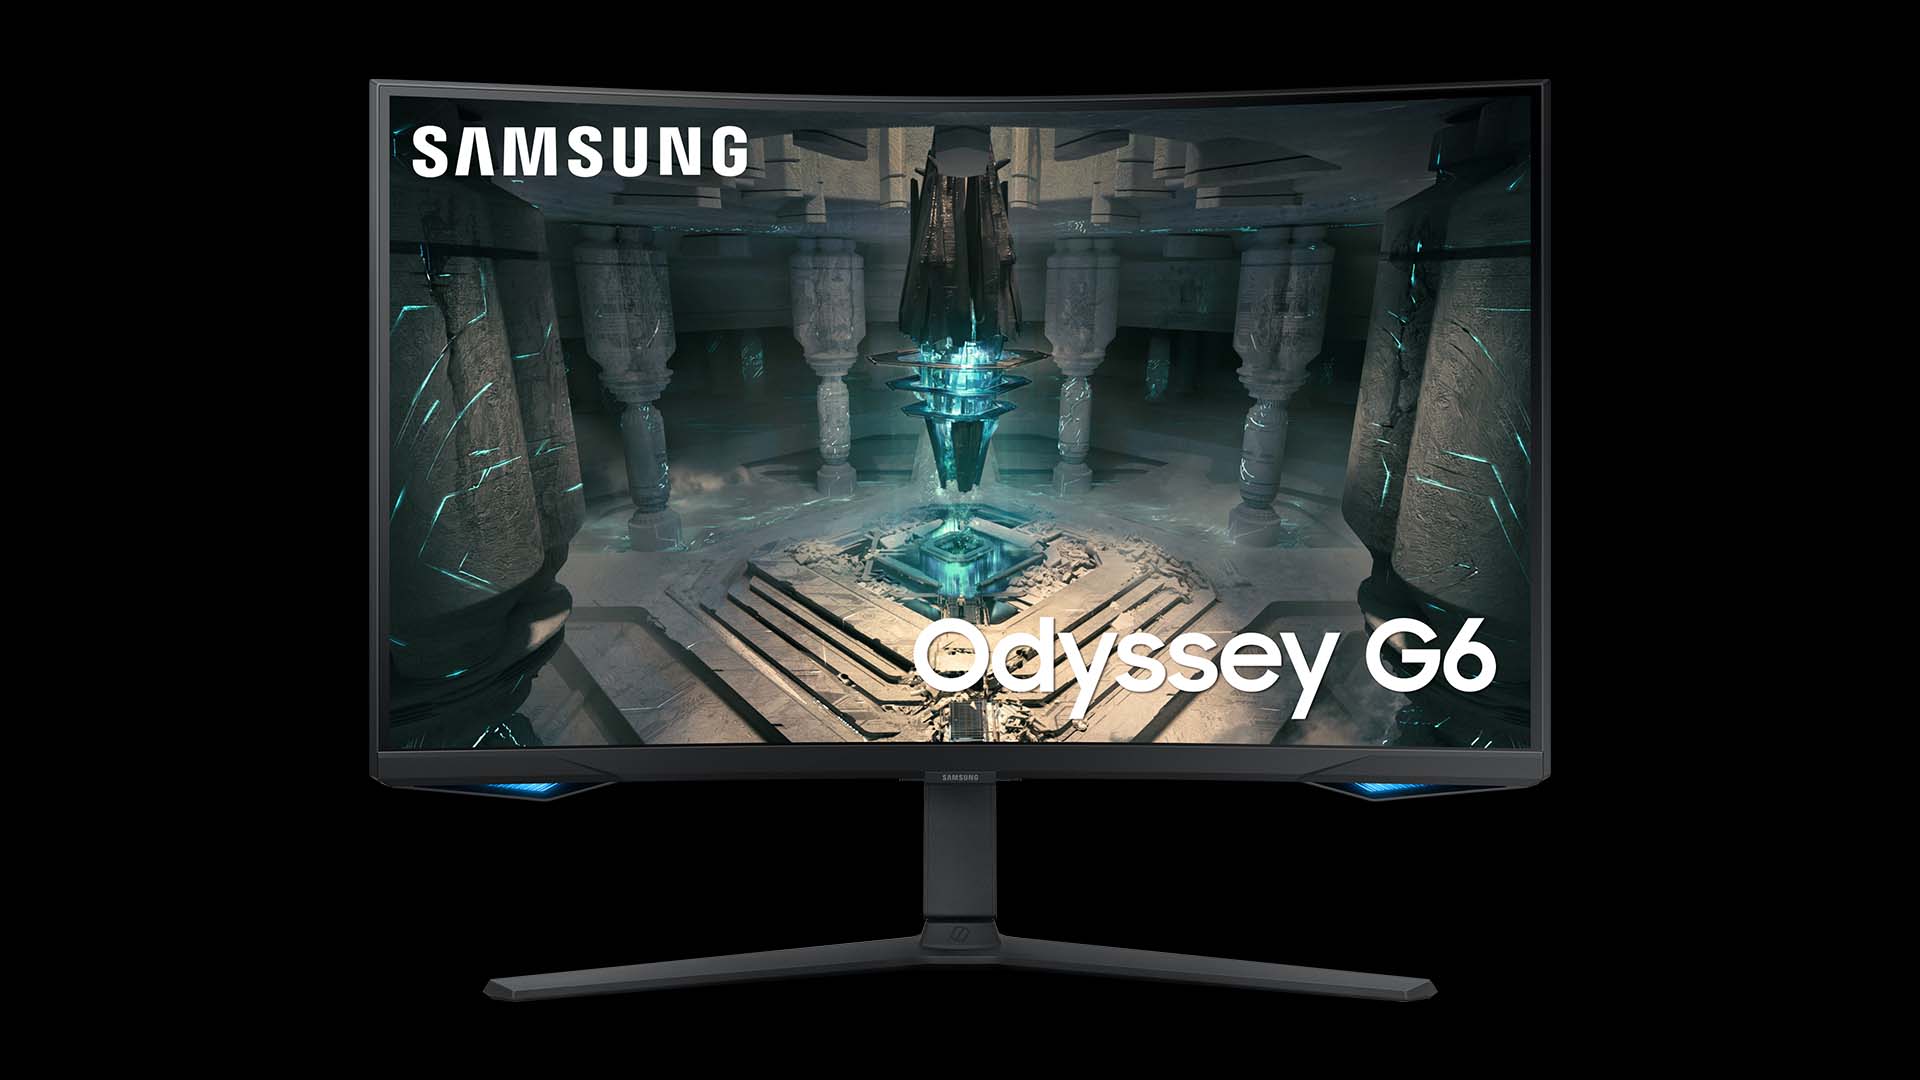 Samsung Brings The Odyssey G6 Gaming Monitor With Smart TV Functionality To Australia